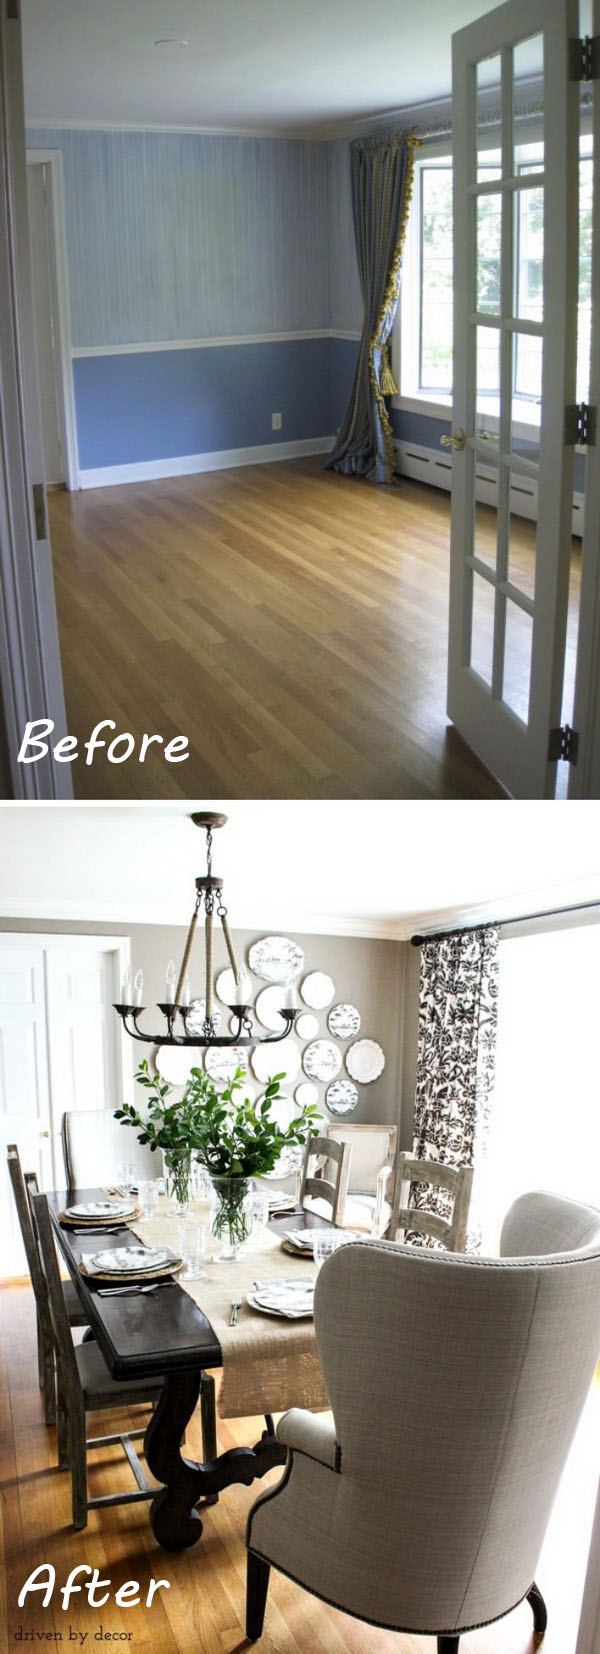 Easy And Budget-Friendly Dining Room Makeover Ideas - Hative